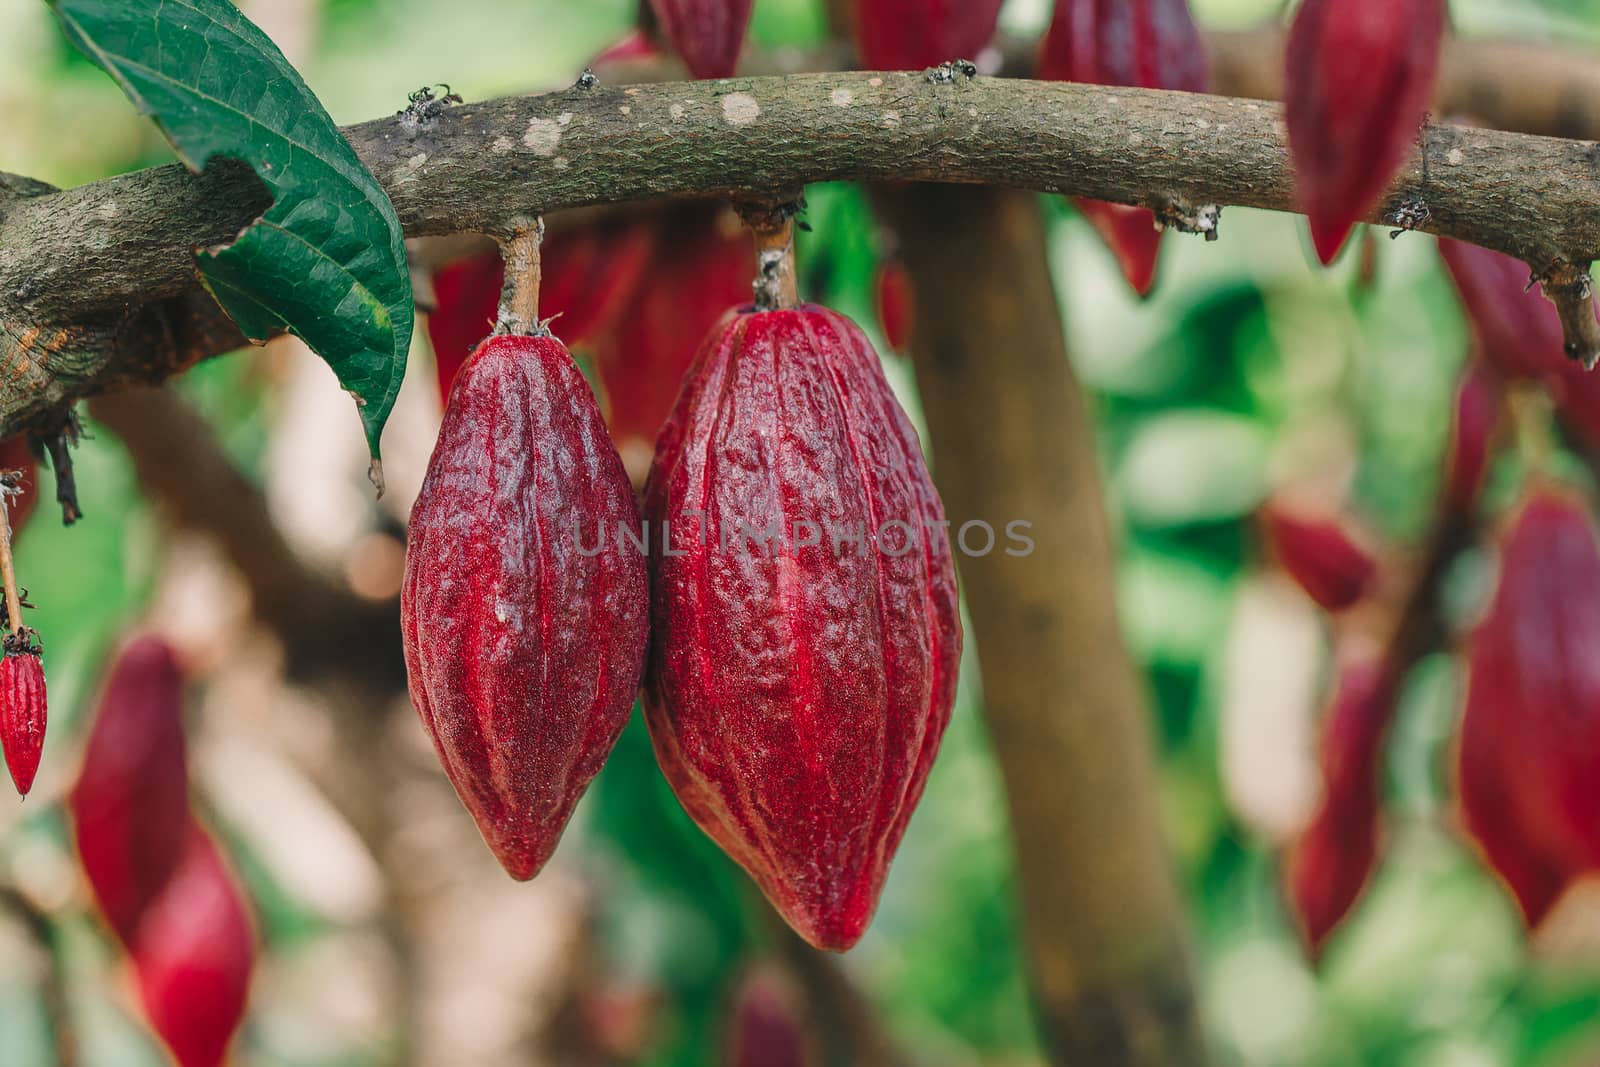 Cacao Tree (Theobroma cacao). Organic cocoa fruit pods in nature.